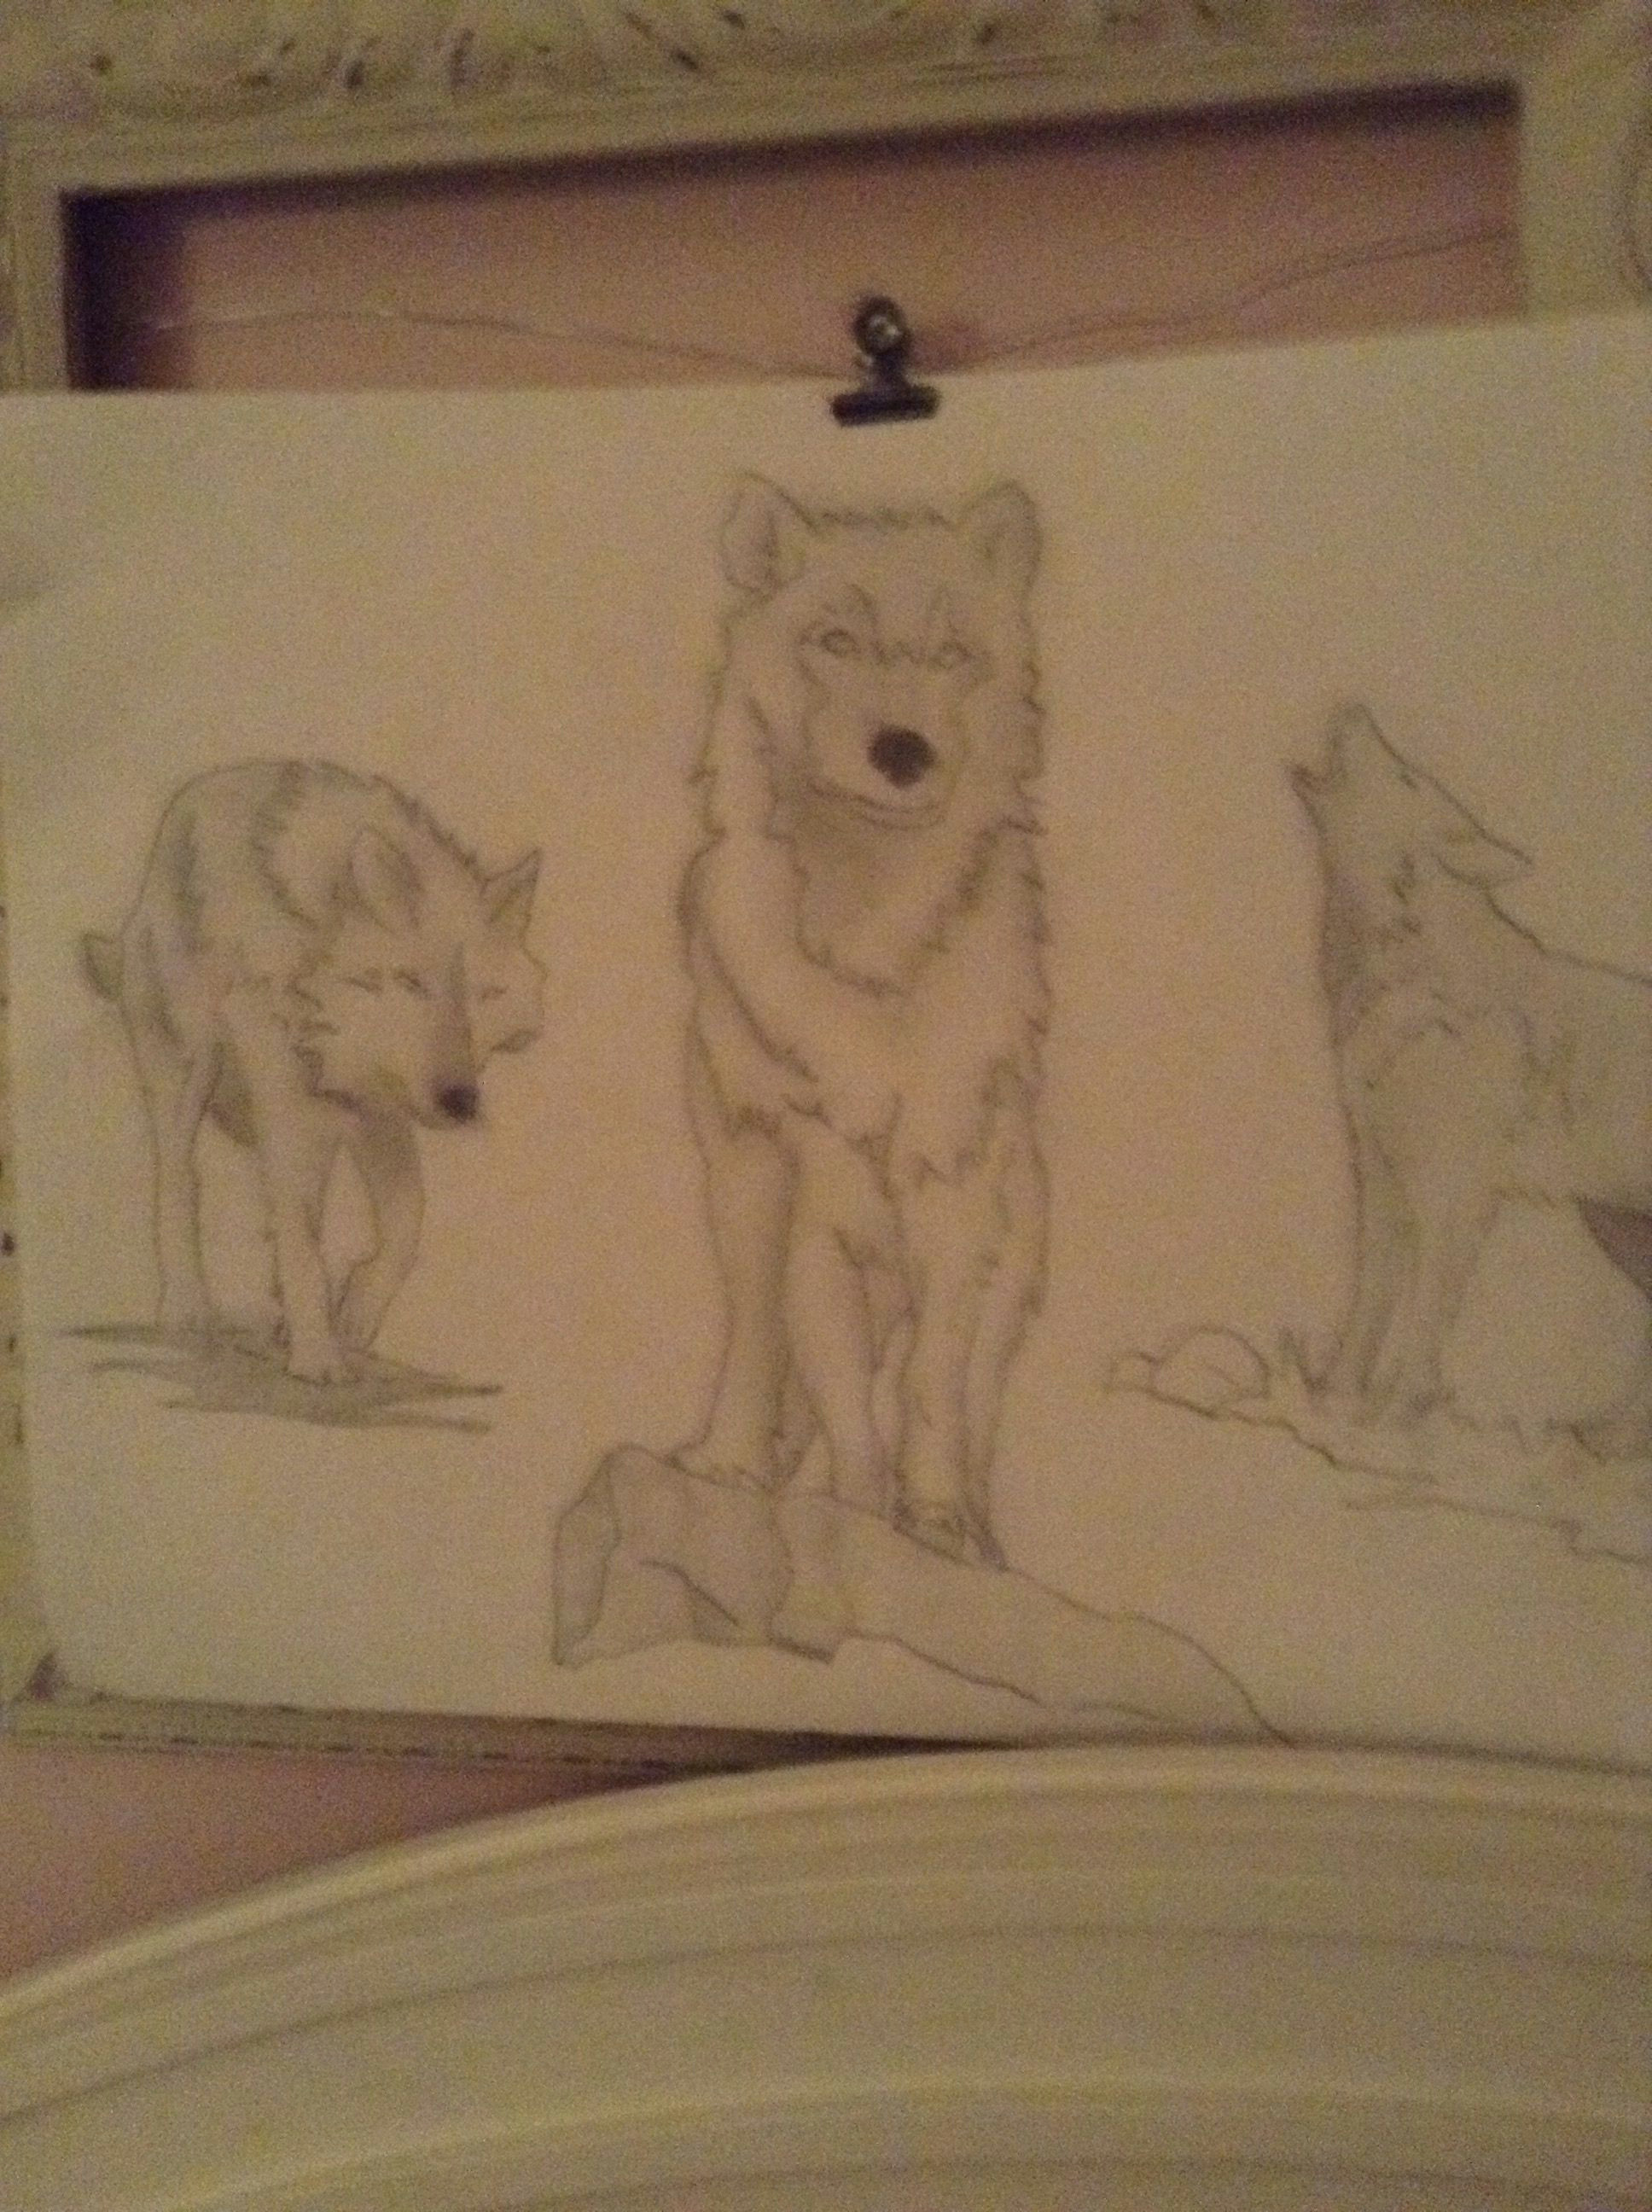 simple wolf sketch i did most of the work the only thing that i didn t draw was the skeleton of the drawing